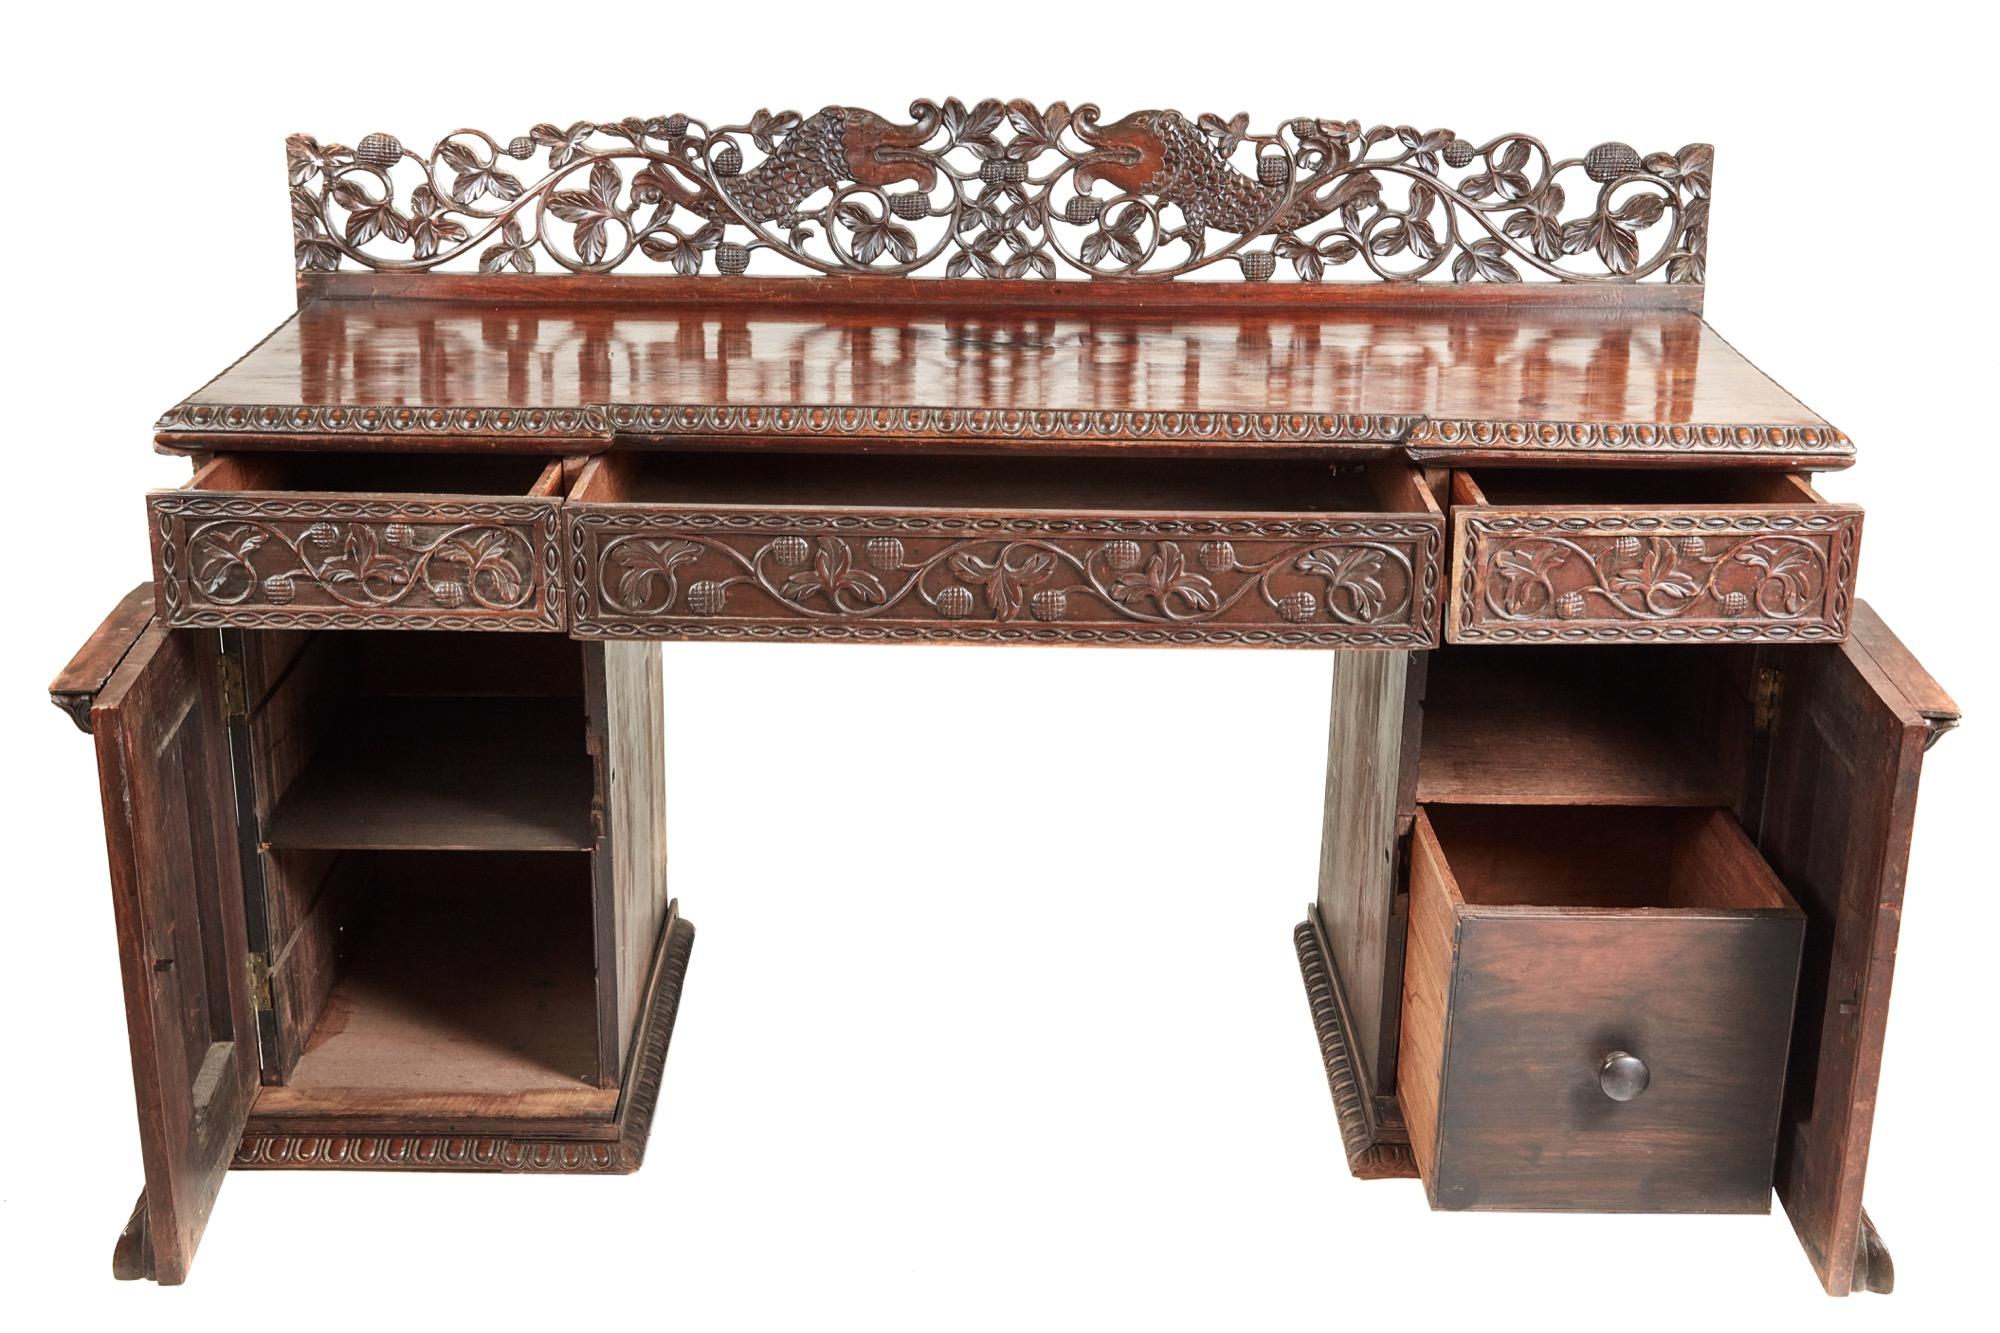 This is an ornate antique small carved Anglo-Indian padauk inverted breakfront pedestal sideboard. This fine piece is very ornately carved all over with so many fine features. It has a finely carved back with acorn and oak leaves surrounded by an